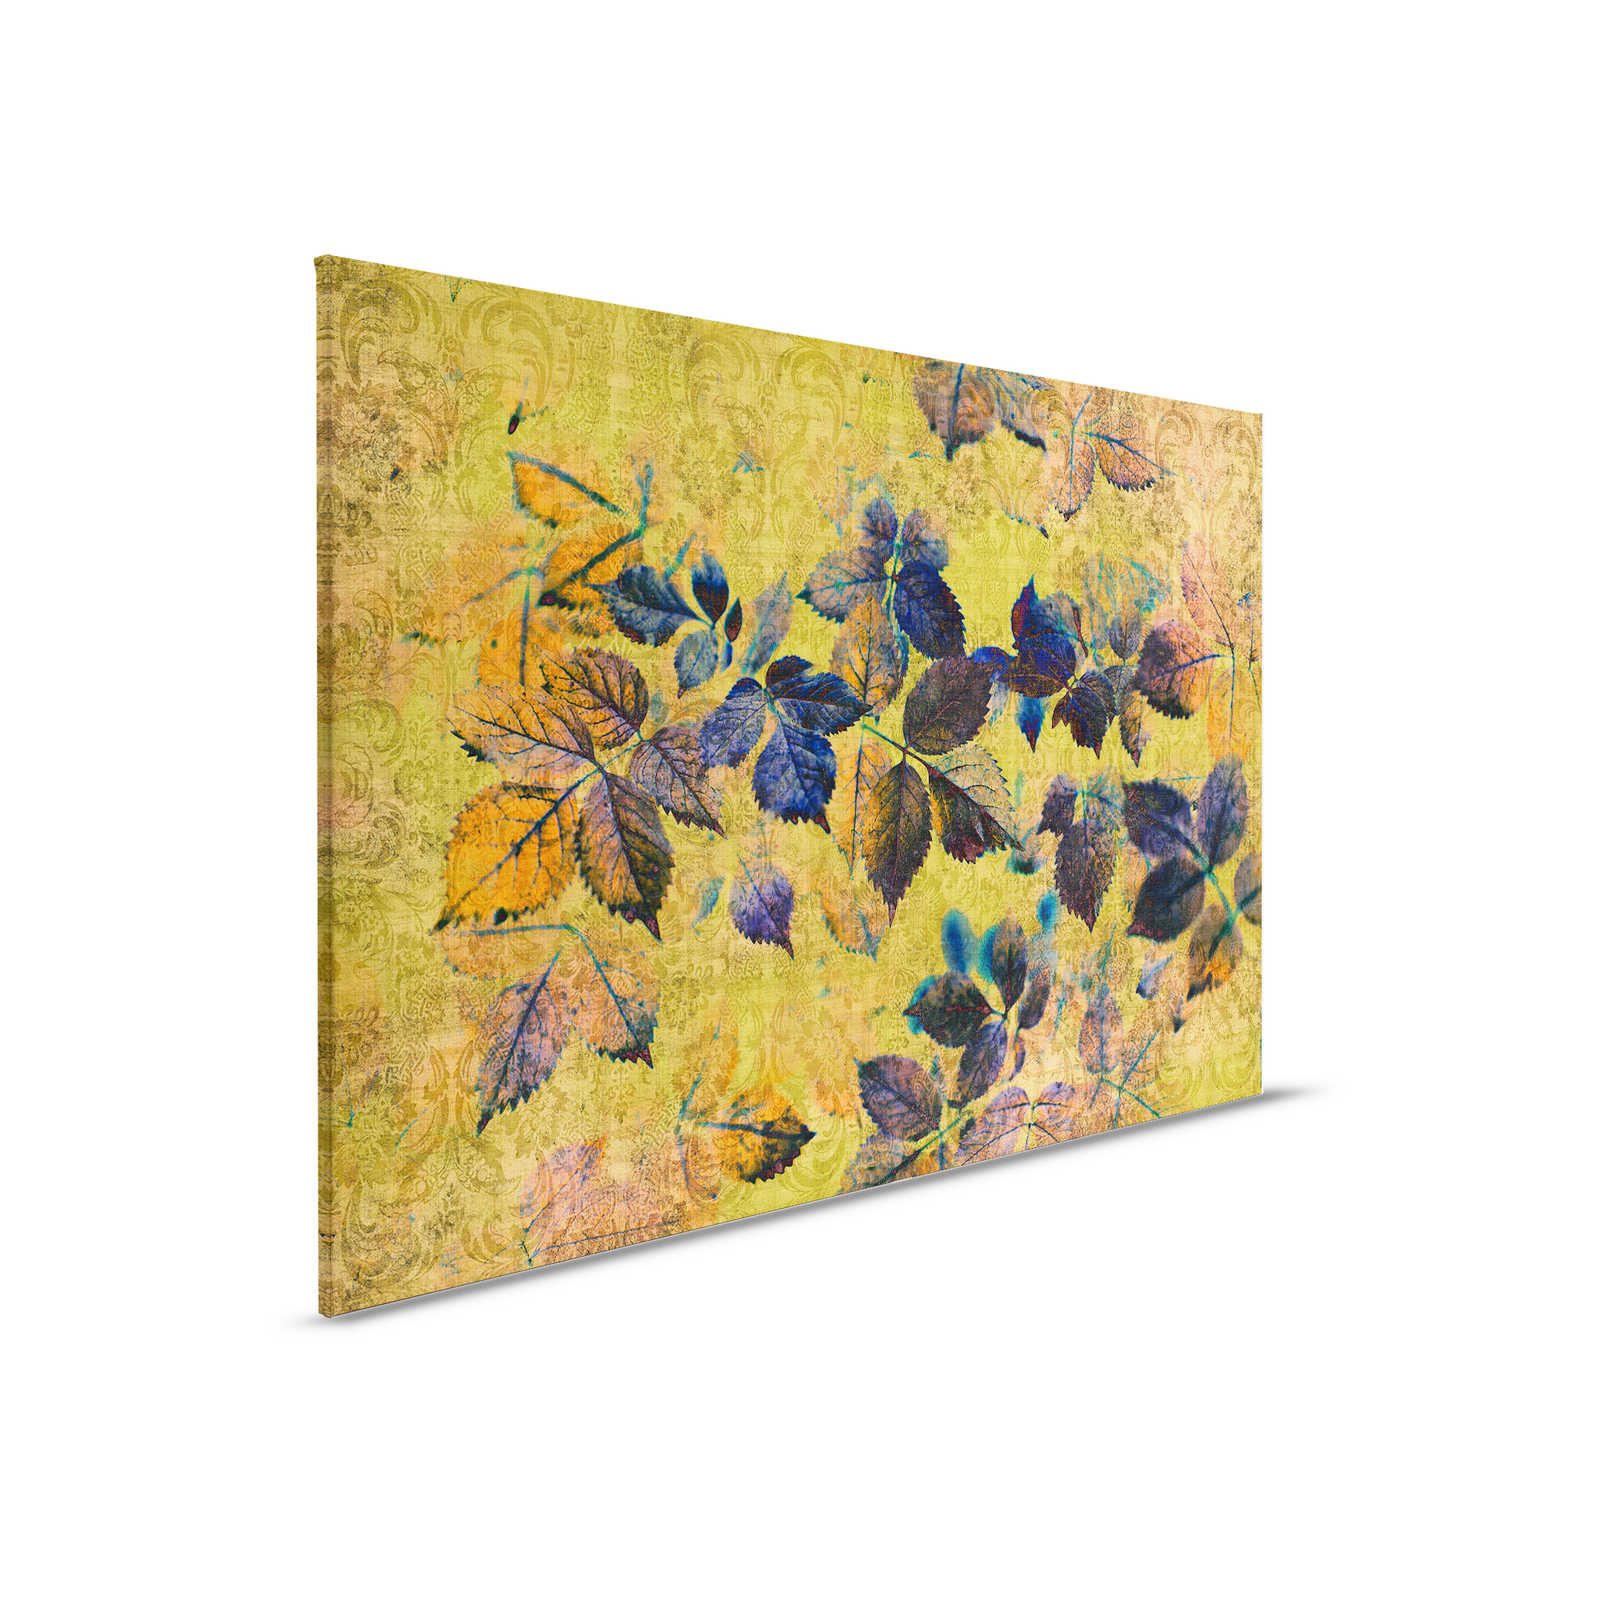 Indian summer 1 - Canvas painting with leaves and ornaments in natural linen structure - 0.90 m x 0.60 m
